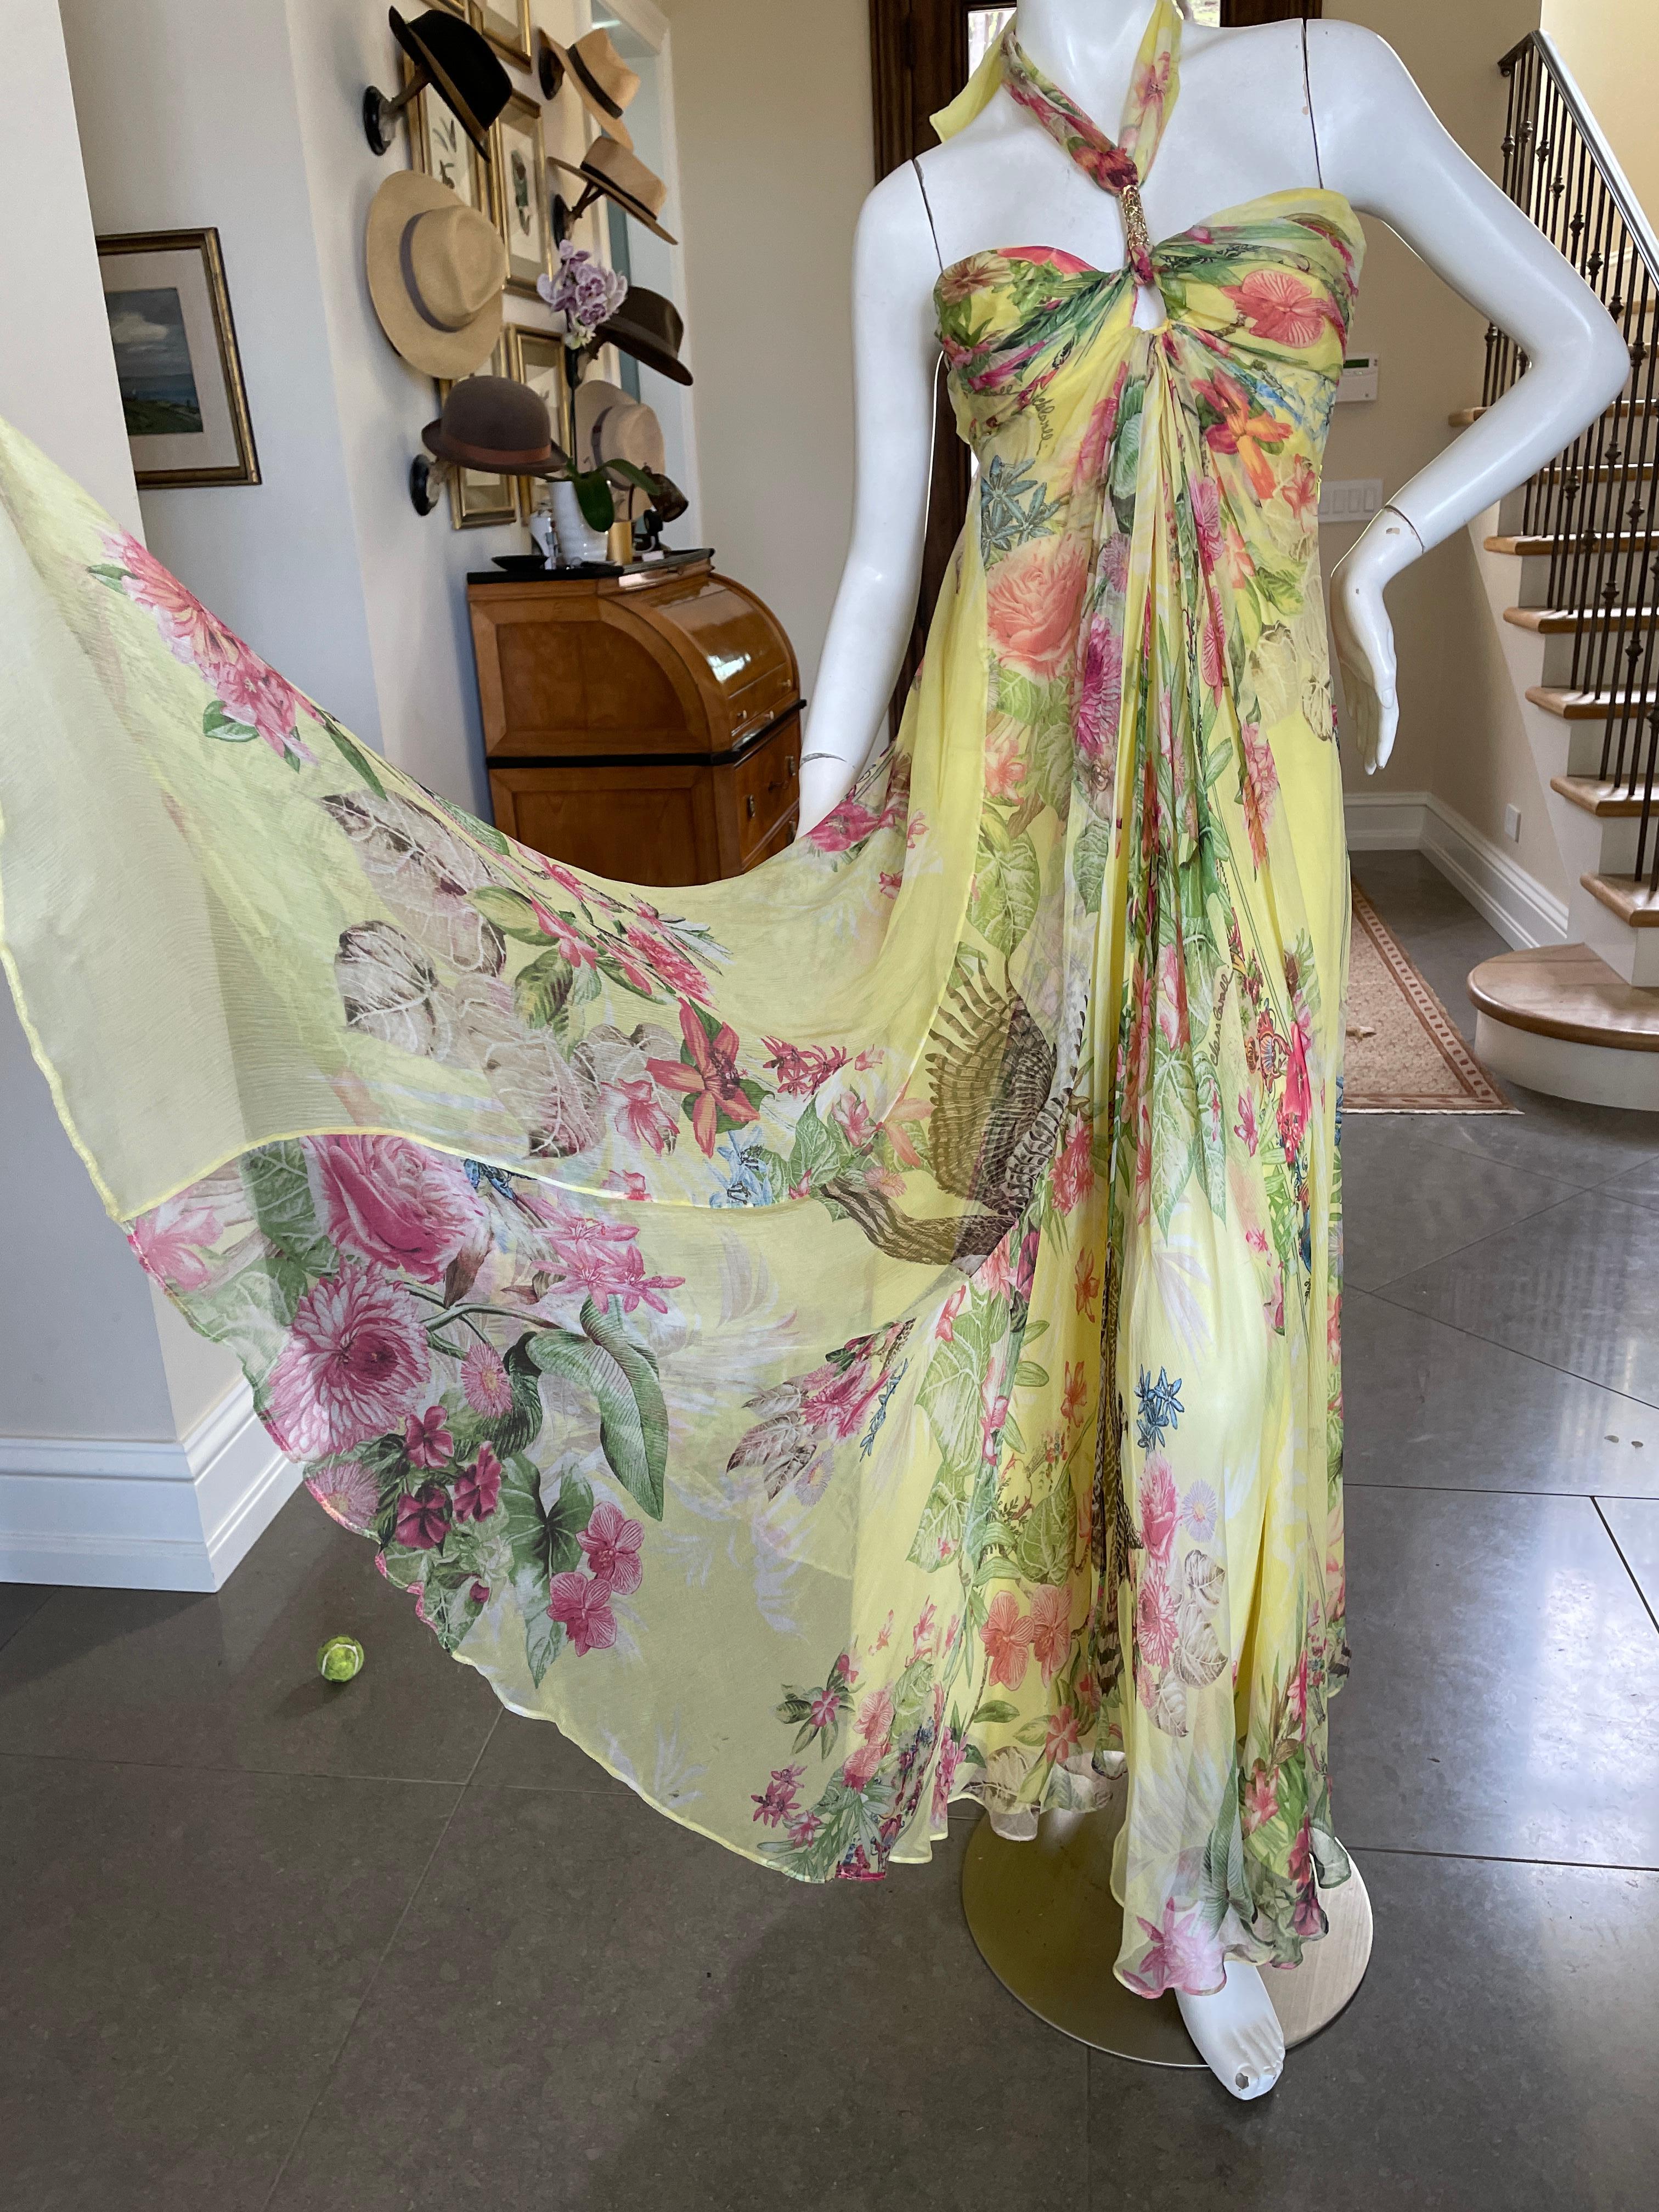 Class Cavalli Charming Yellow Vintage Pheasant Print Chiffon  Dress  In Excellent Condition For Sale In Cloverdale, CA